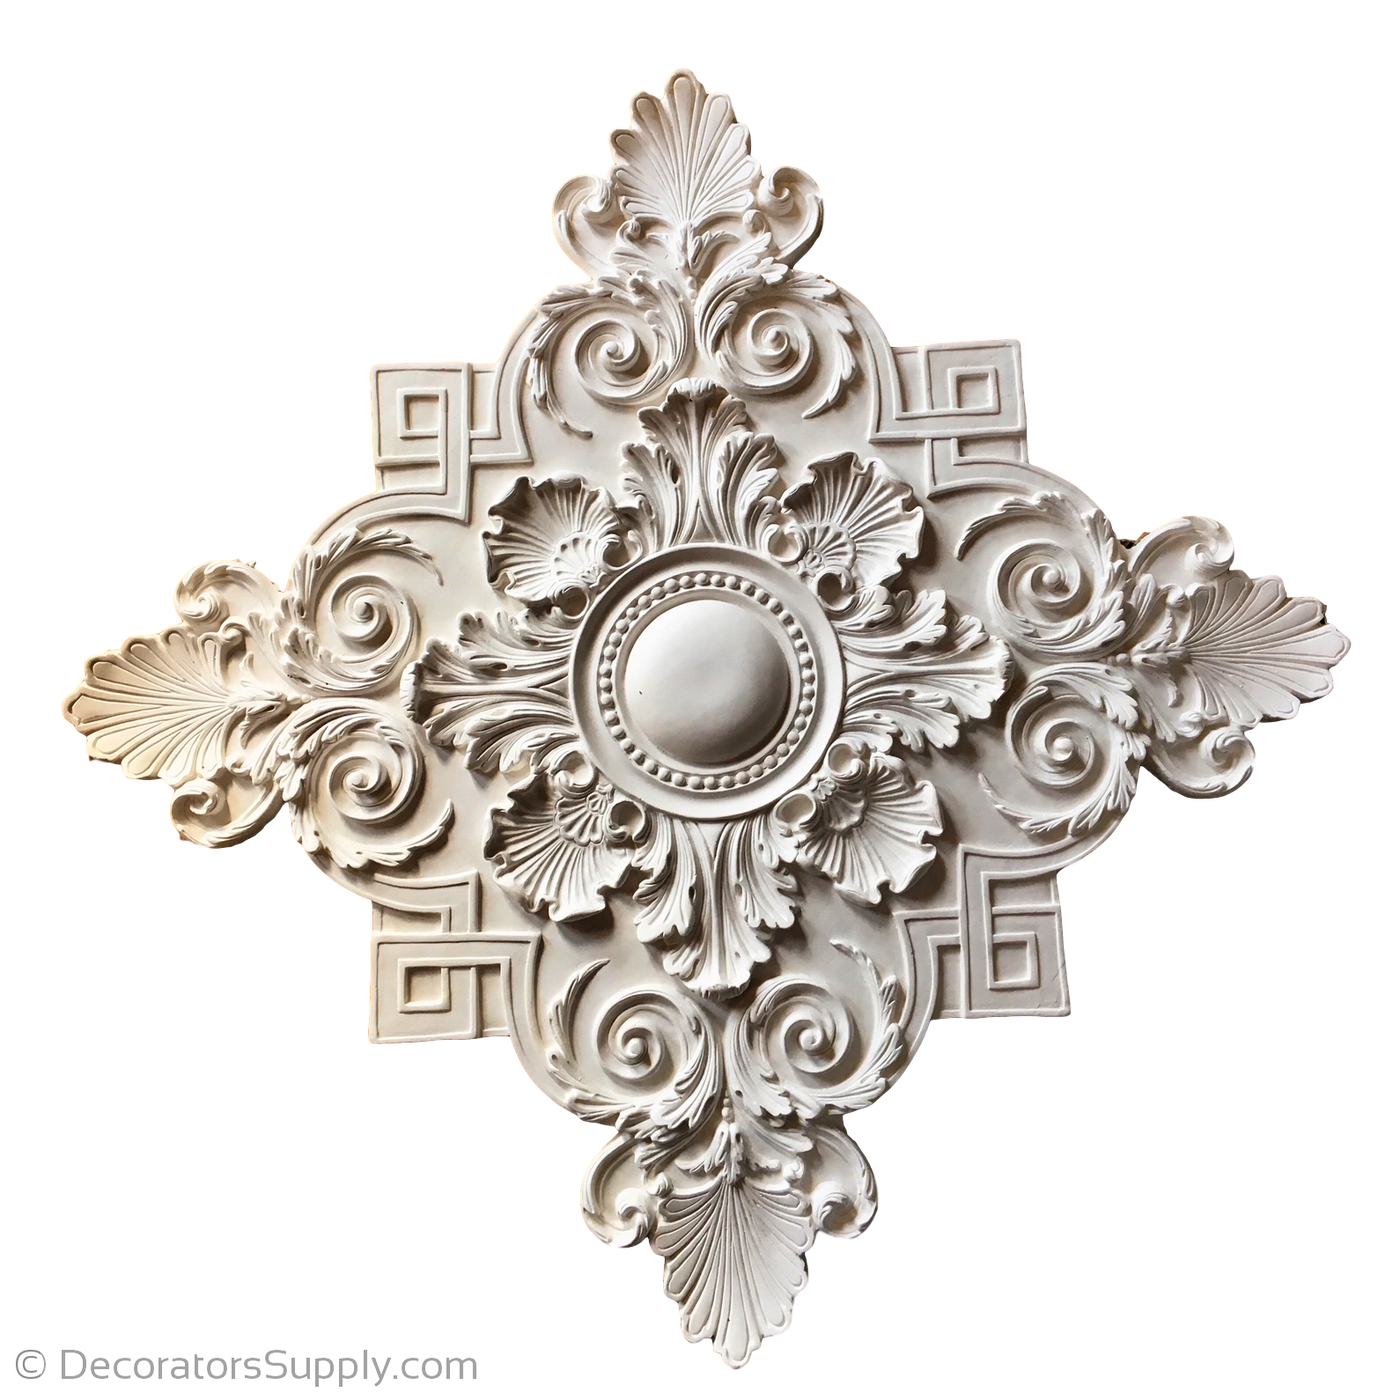 Large Ceiling Medallions For Chandeliers And Ceiling Fans Since 1885